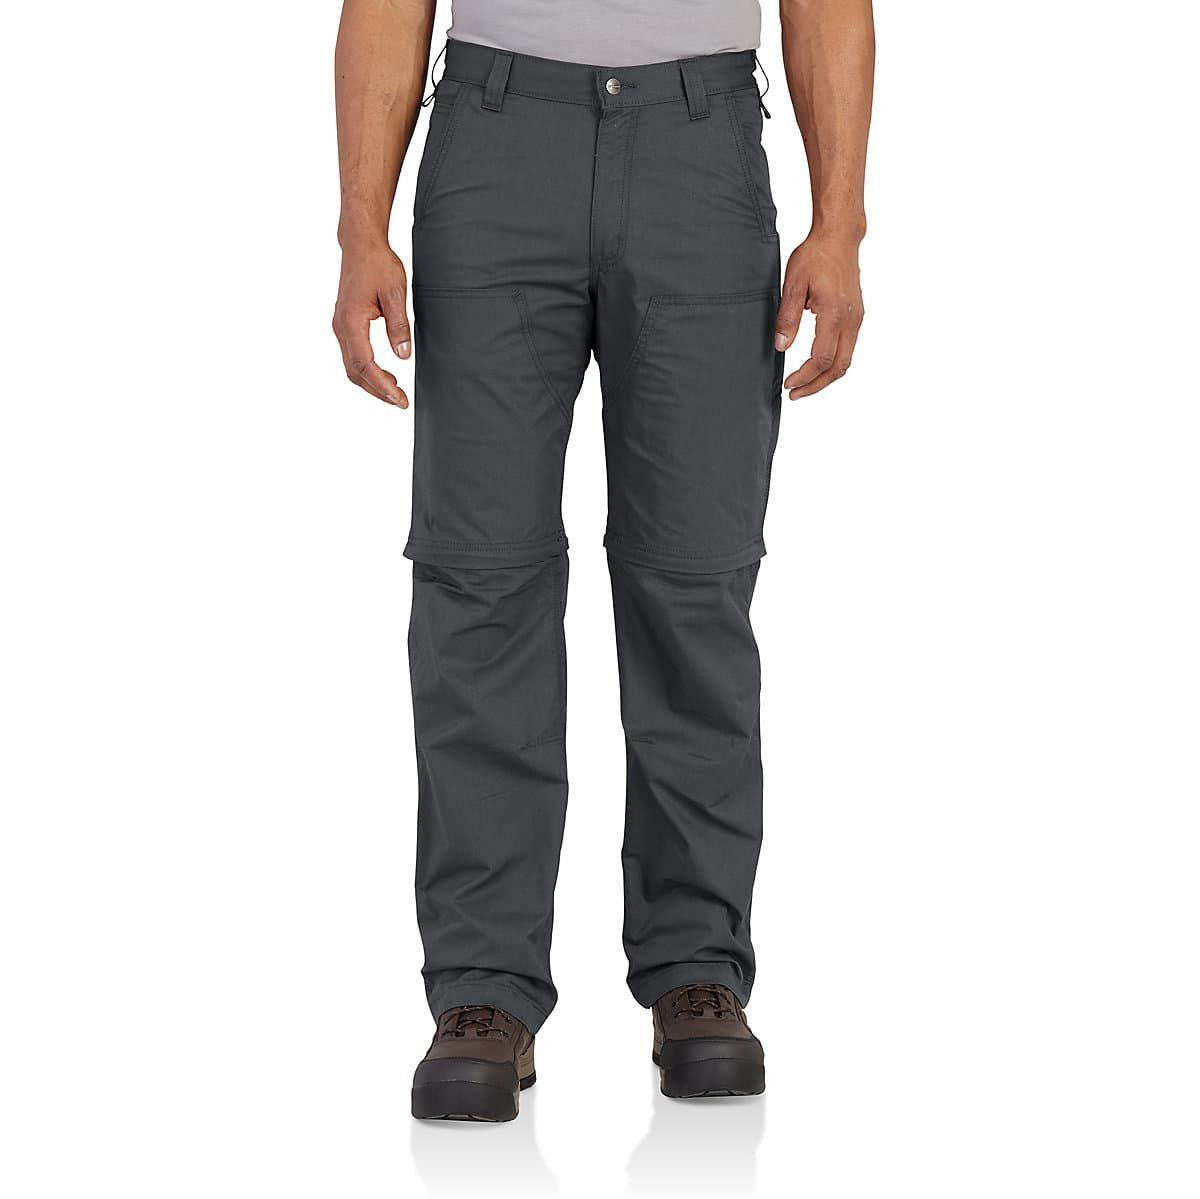 New carhartt extremes zip off pant